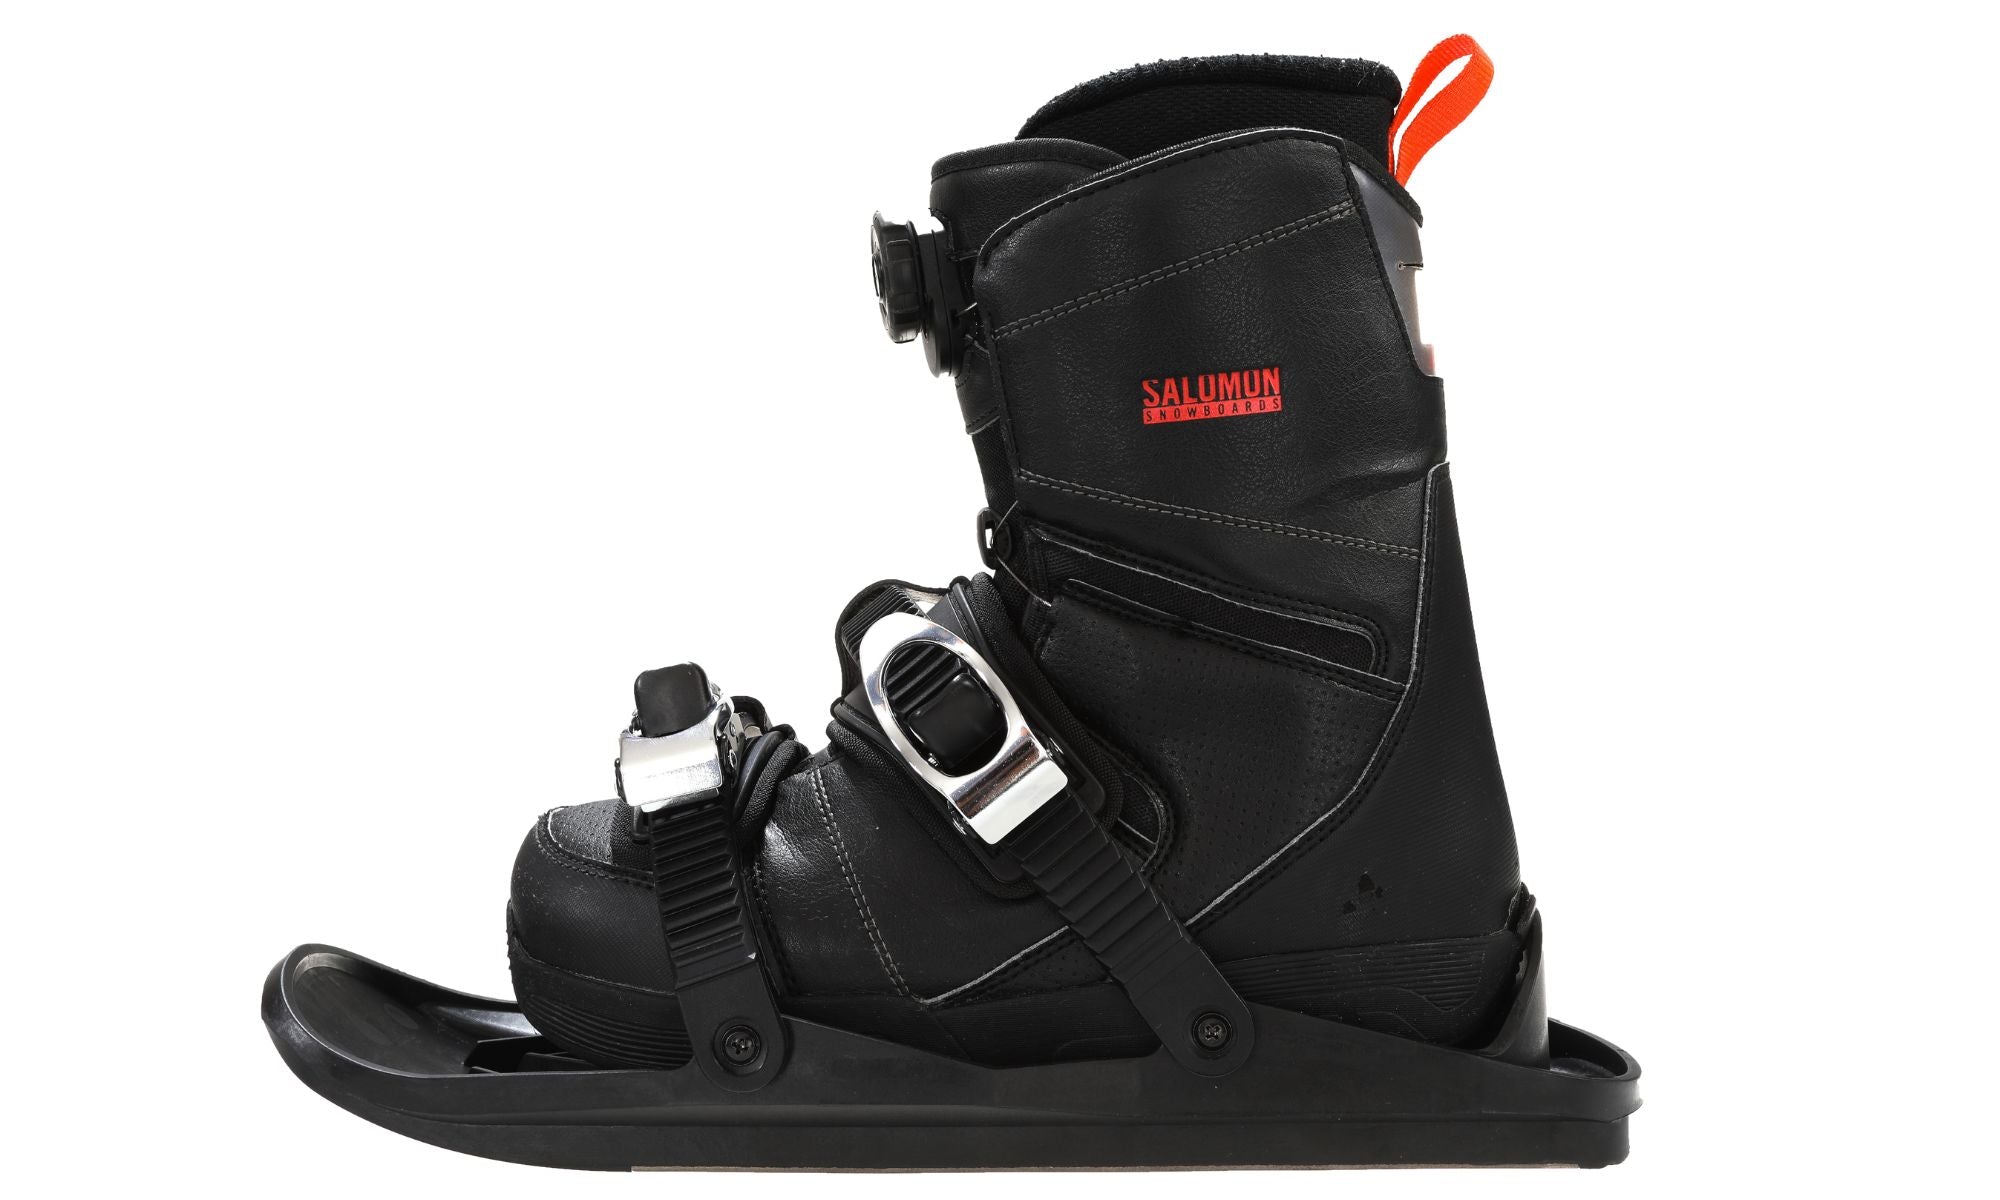 Snowfeet mini skis, downhill skiing, combination of skiing and skating. Skiskating, new winter sport, ski-shoe attachments. Use Snowfeet with winter boots or snowboard shoes. 